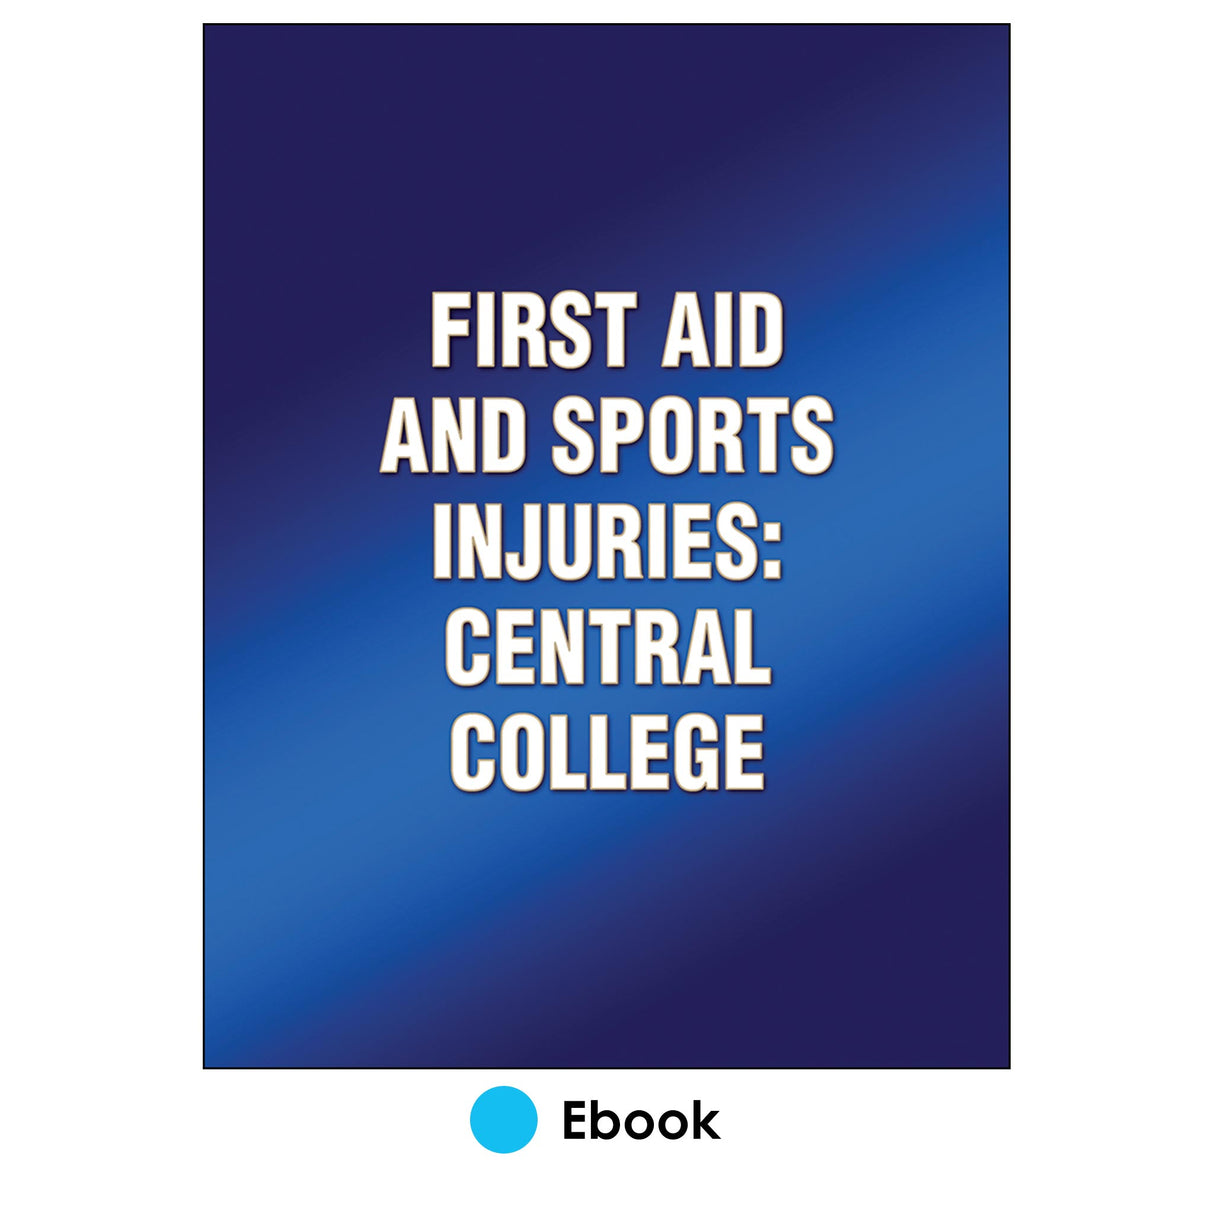 First Aid and Sports Injuries: Central College